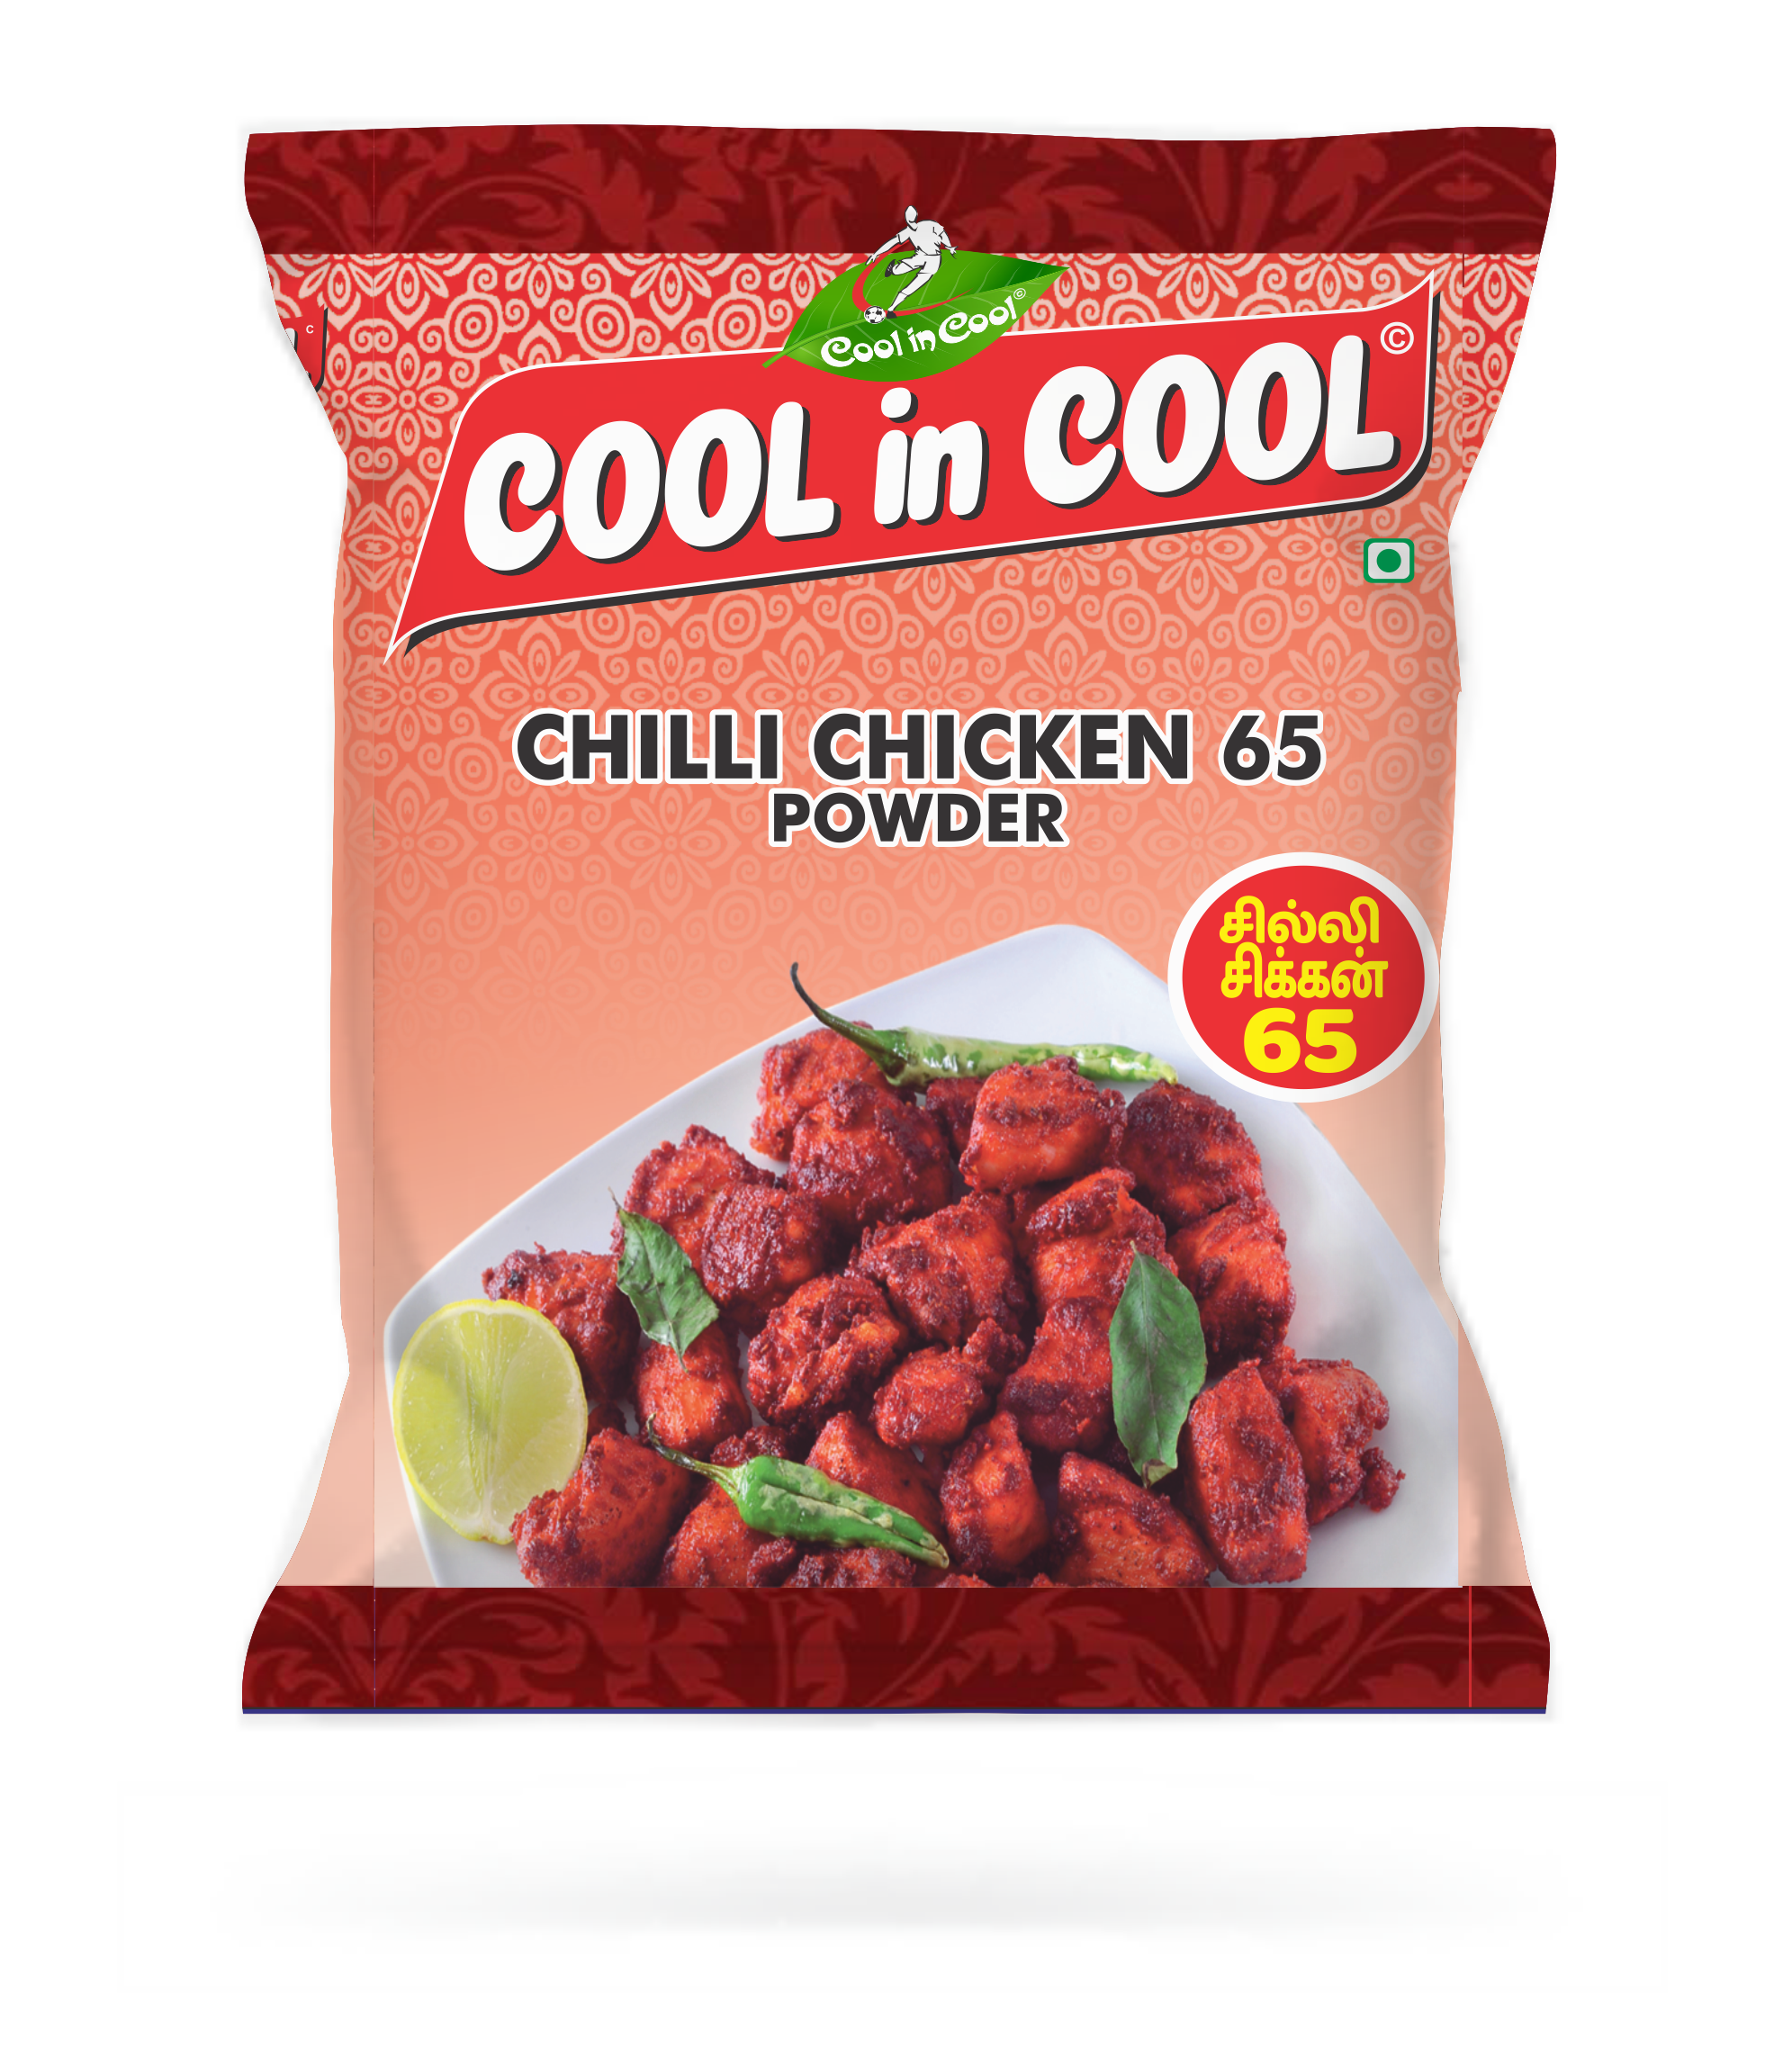 Chilli chicken 65 Powder - Cool in Cool Masala - Best Masala Products